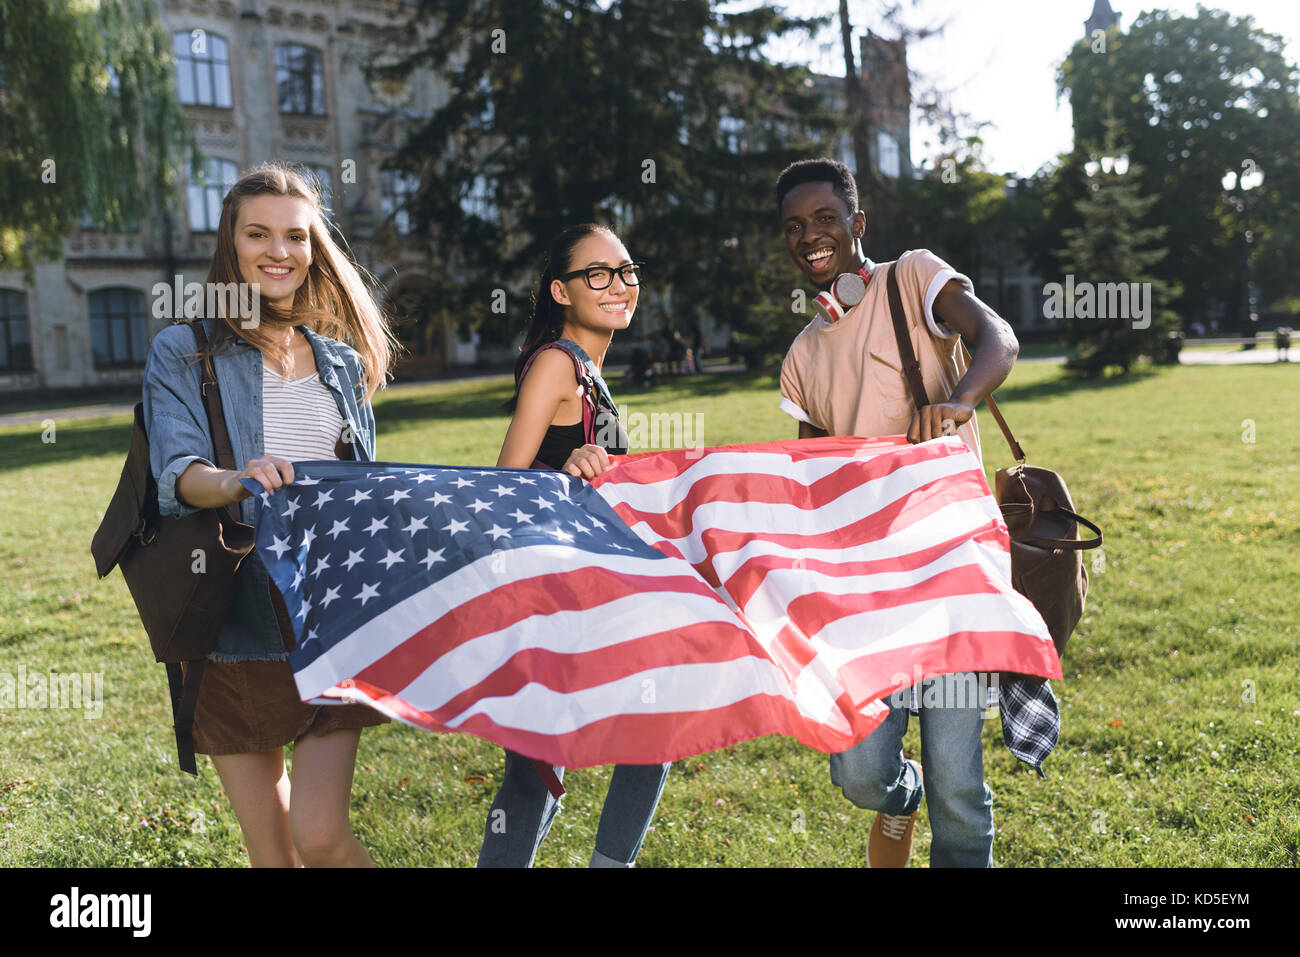 multicultural friends with american flag Stock Photo